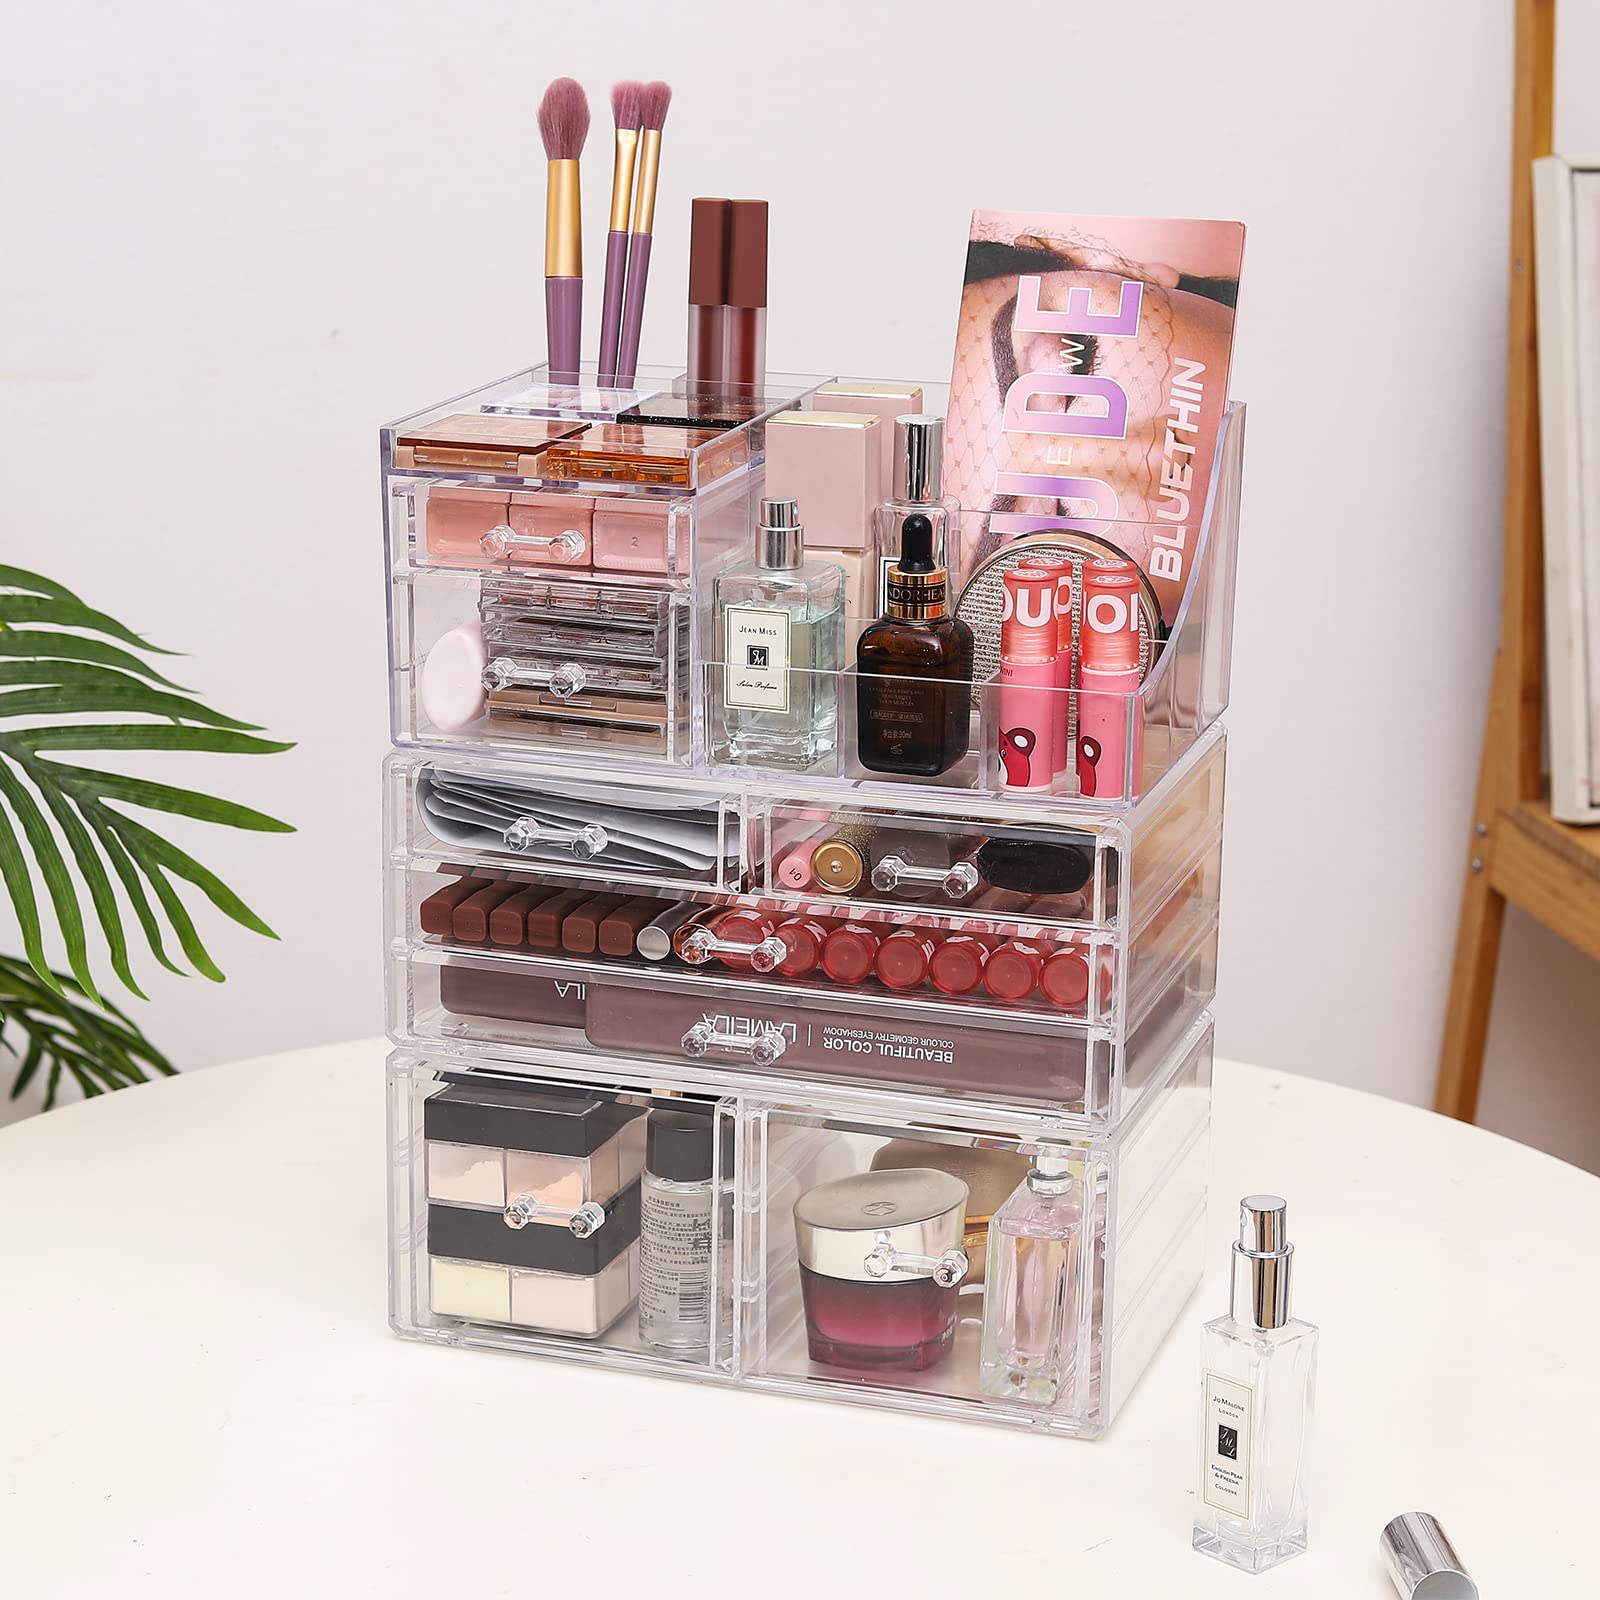 Makeup Organizer Bathroom Organizers and Storage With 8 Drawers for Vanity Skincare Countertop Desk,Clear Cosmetic Display Case for Lipstick,Brushes,Lotions,Eyeshadow,Nail Polish and Jewelry